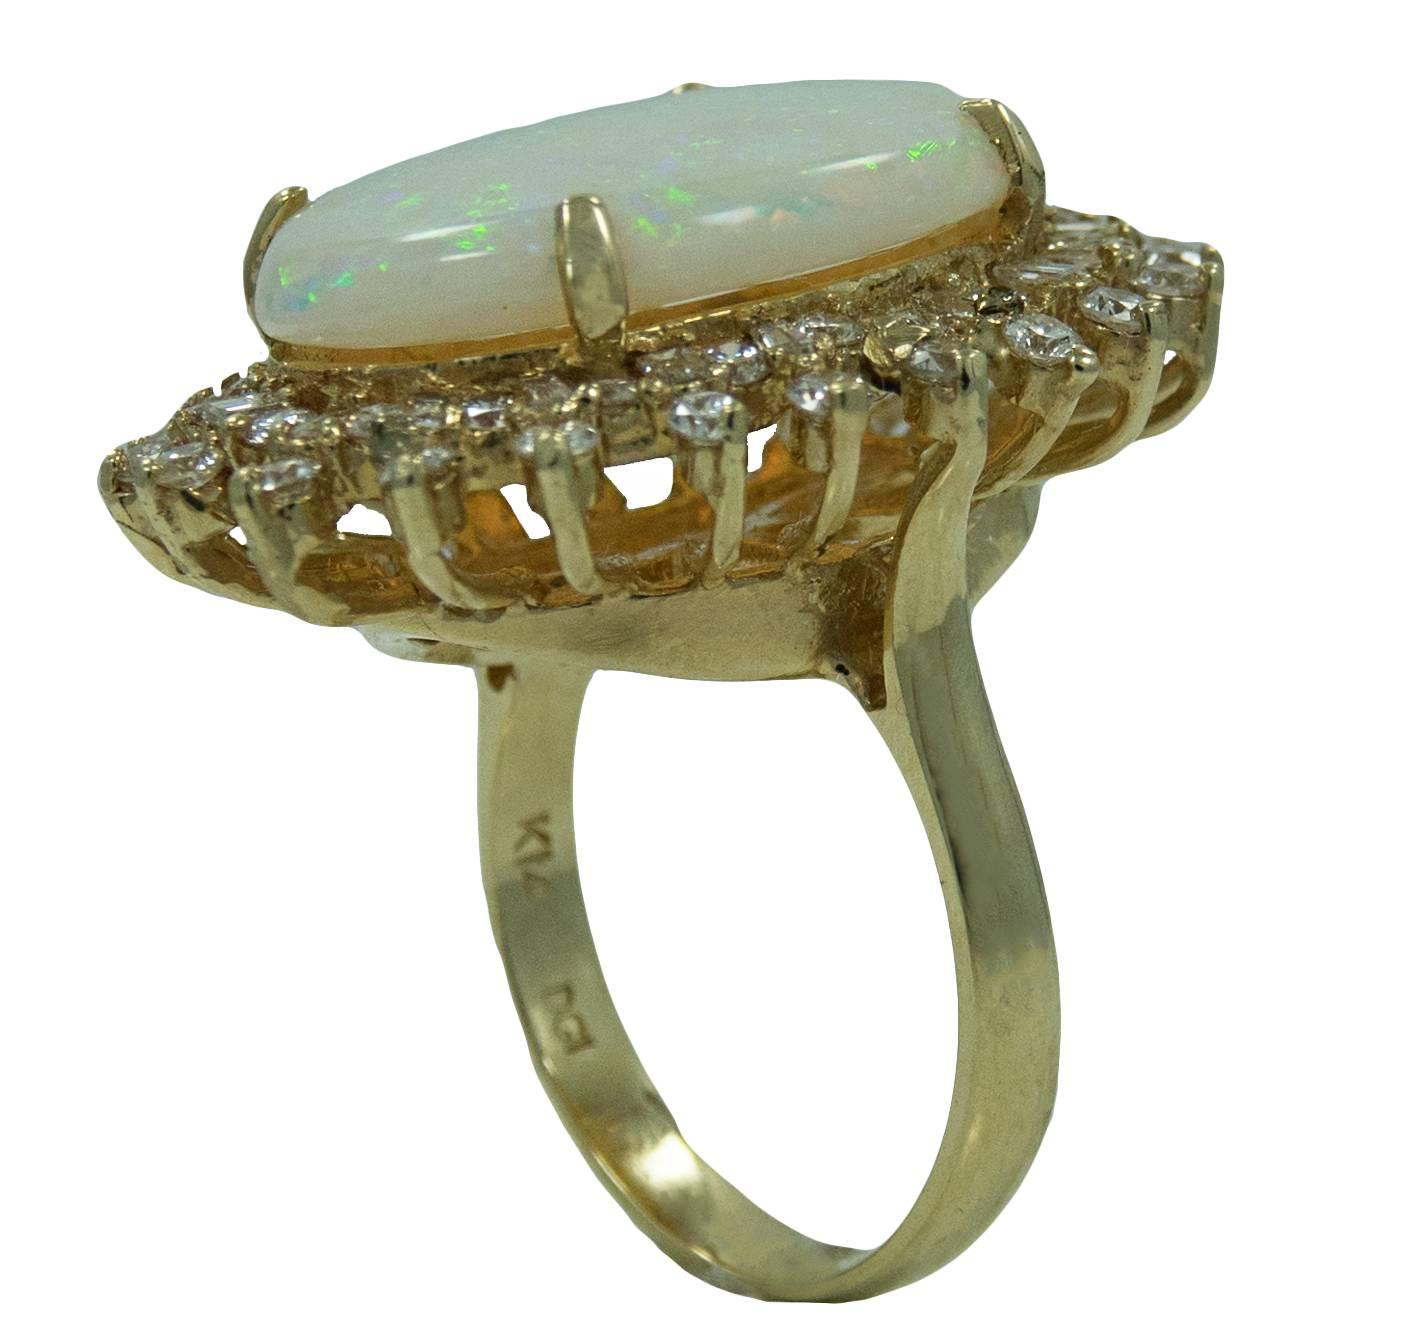 14K Yellow Gold Ring With Center Opal Stone Weighing A Total Carat Weight Of 8.95ct and Diamonds With a Total Carat Weight Of 1.72ct. This Ring Is A Size 6 and is in Beautiful Condition.